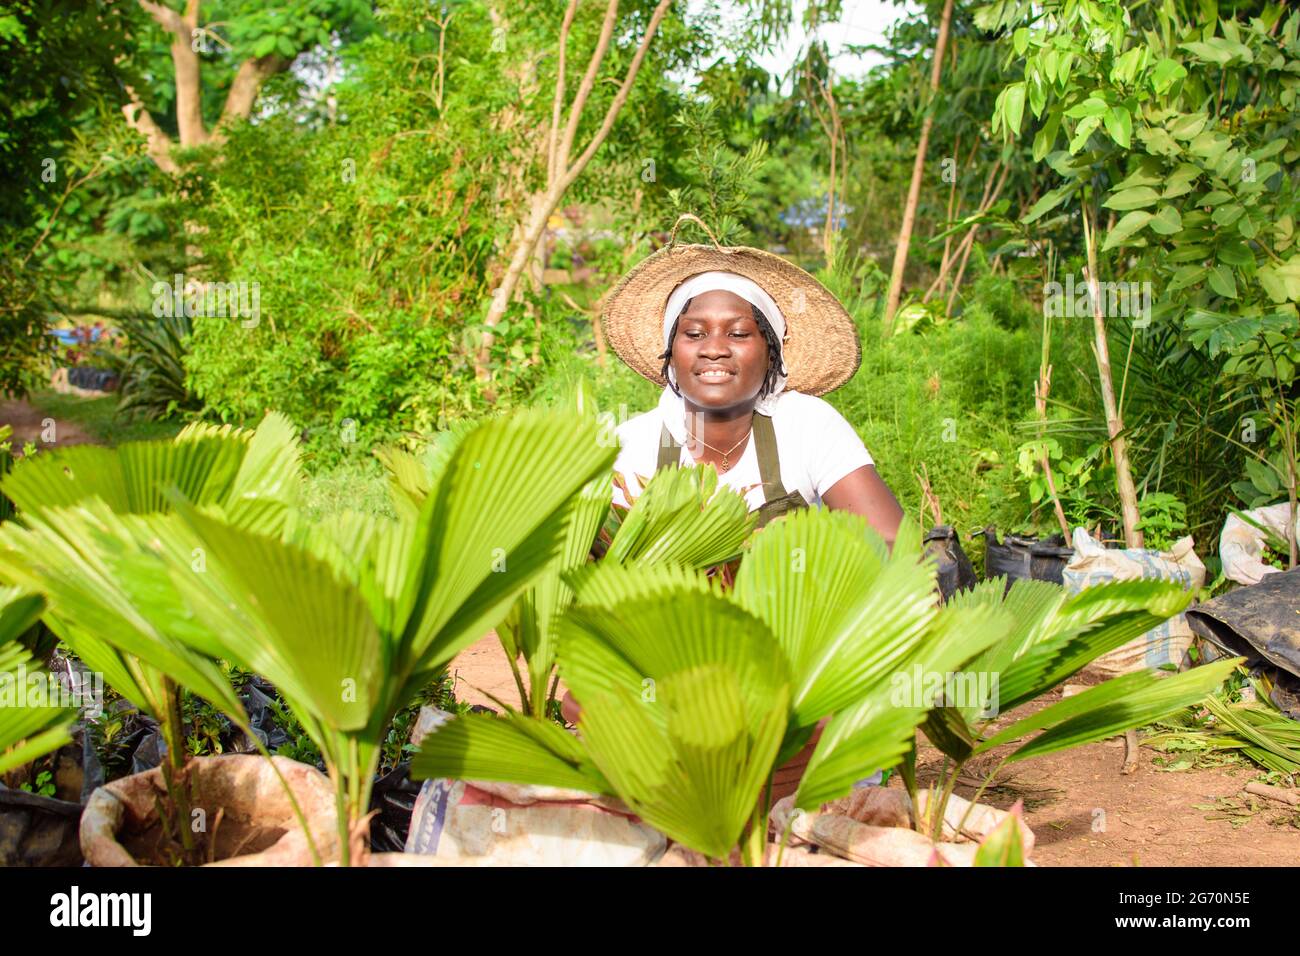 African female gardener, florist or horticulturist wearing an apron and a hat, working while squatting in a green and colorful flowers and plants gard Stock Photo